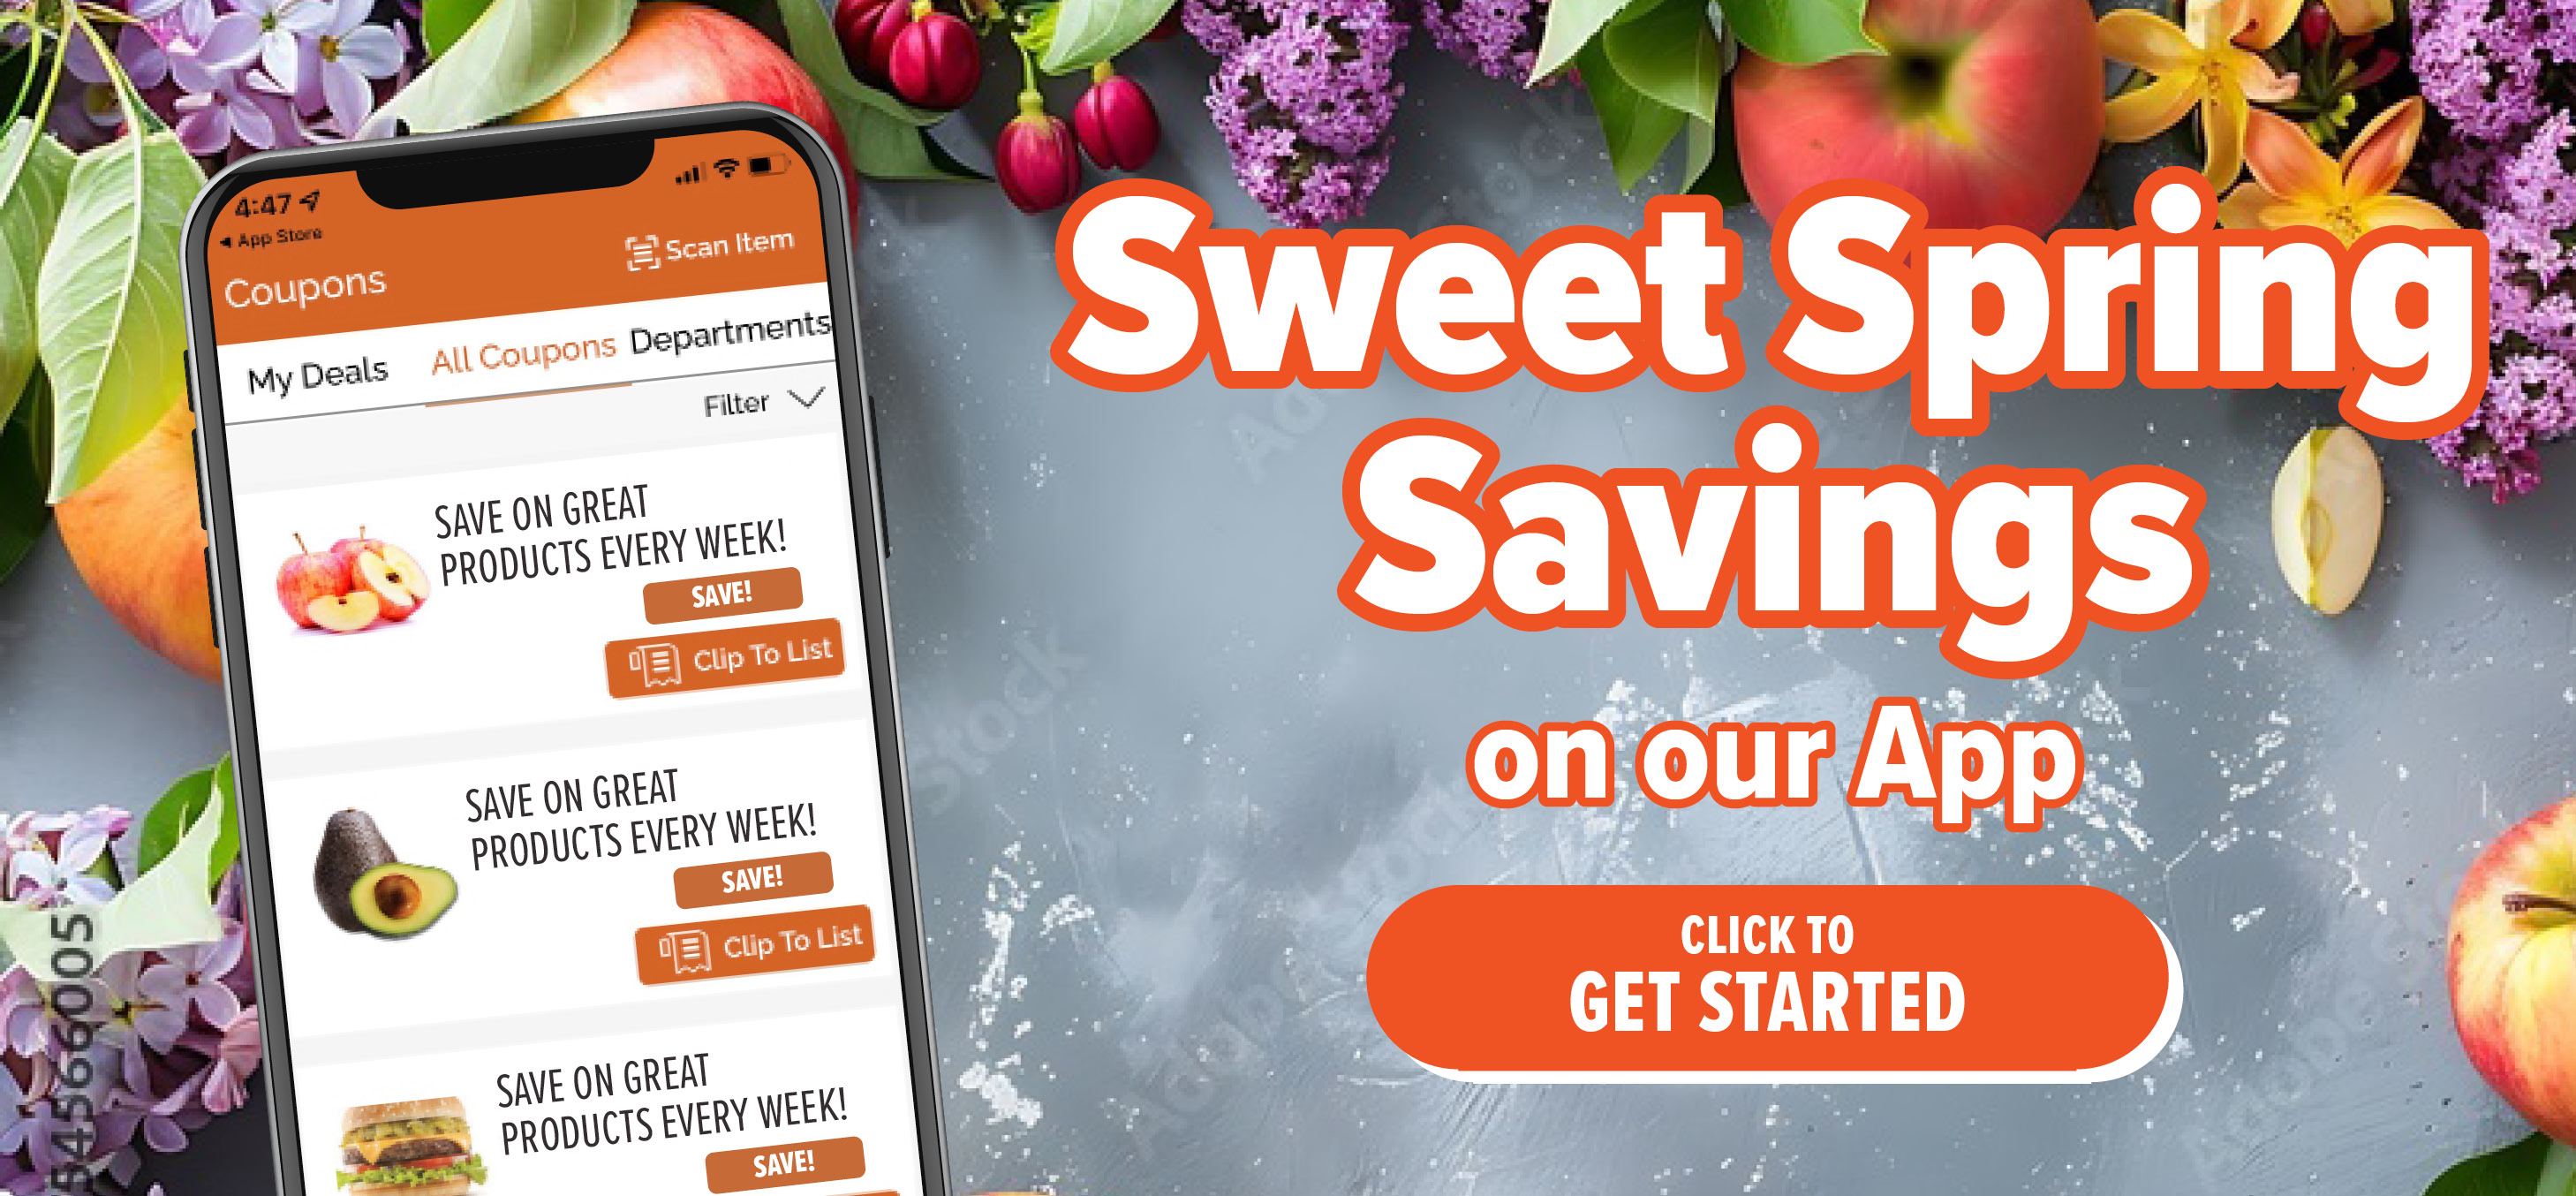 View Digital Coupons in our App